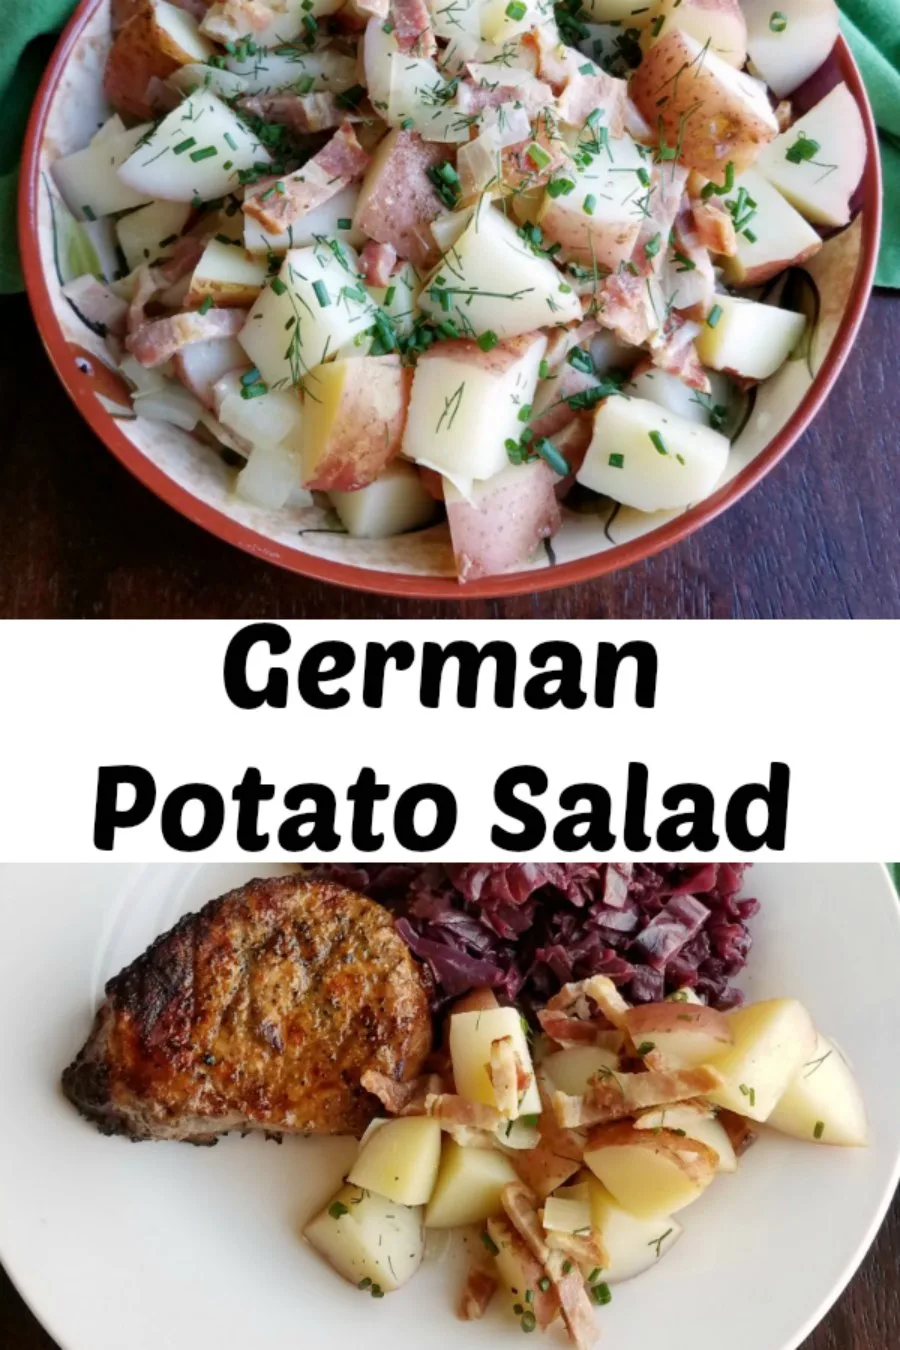 This simple German style potato salad is a great side dish all year long. It is best served warm or at room temperature and is isn’t loaded down with dressing. Don’t let that make you think it isn’t flavorful though. It has a little zing and plenty of bacon!